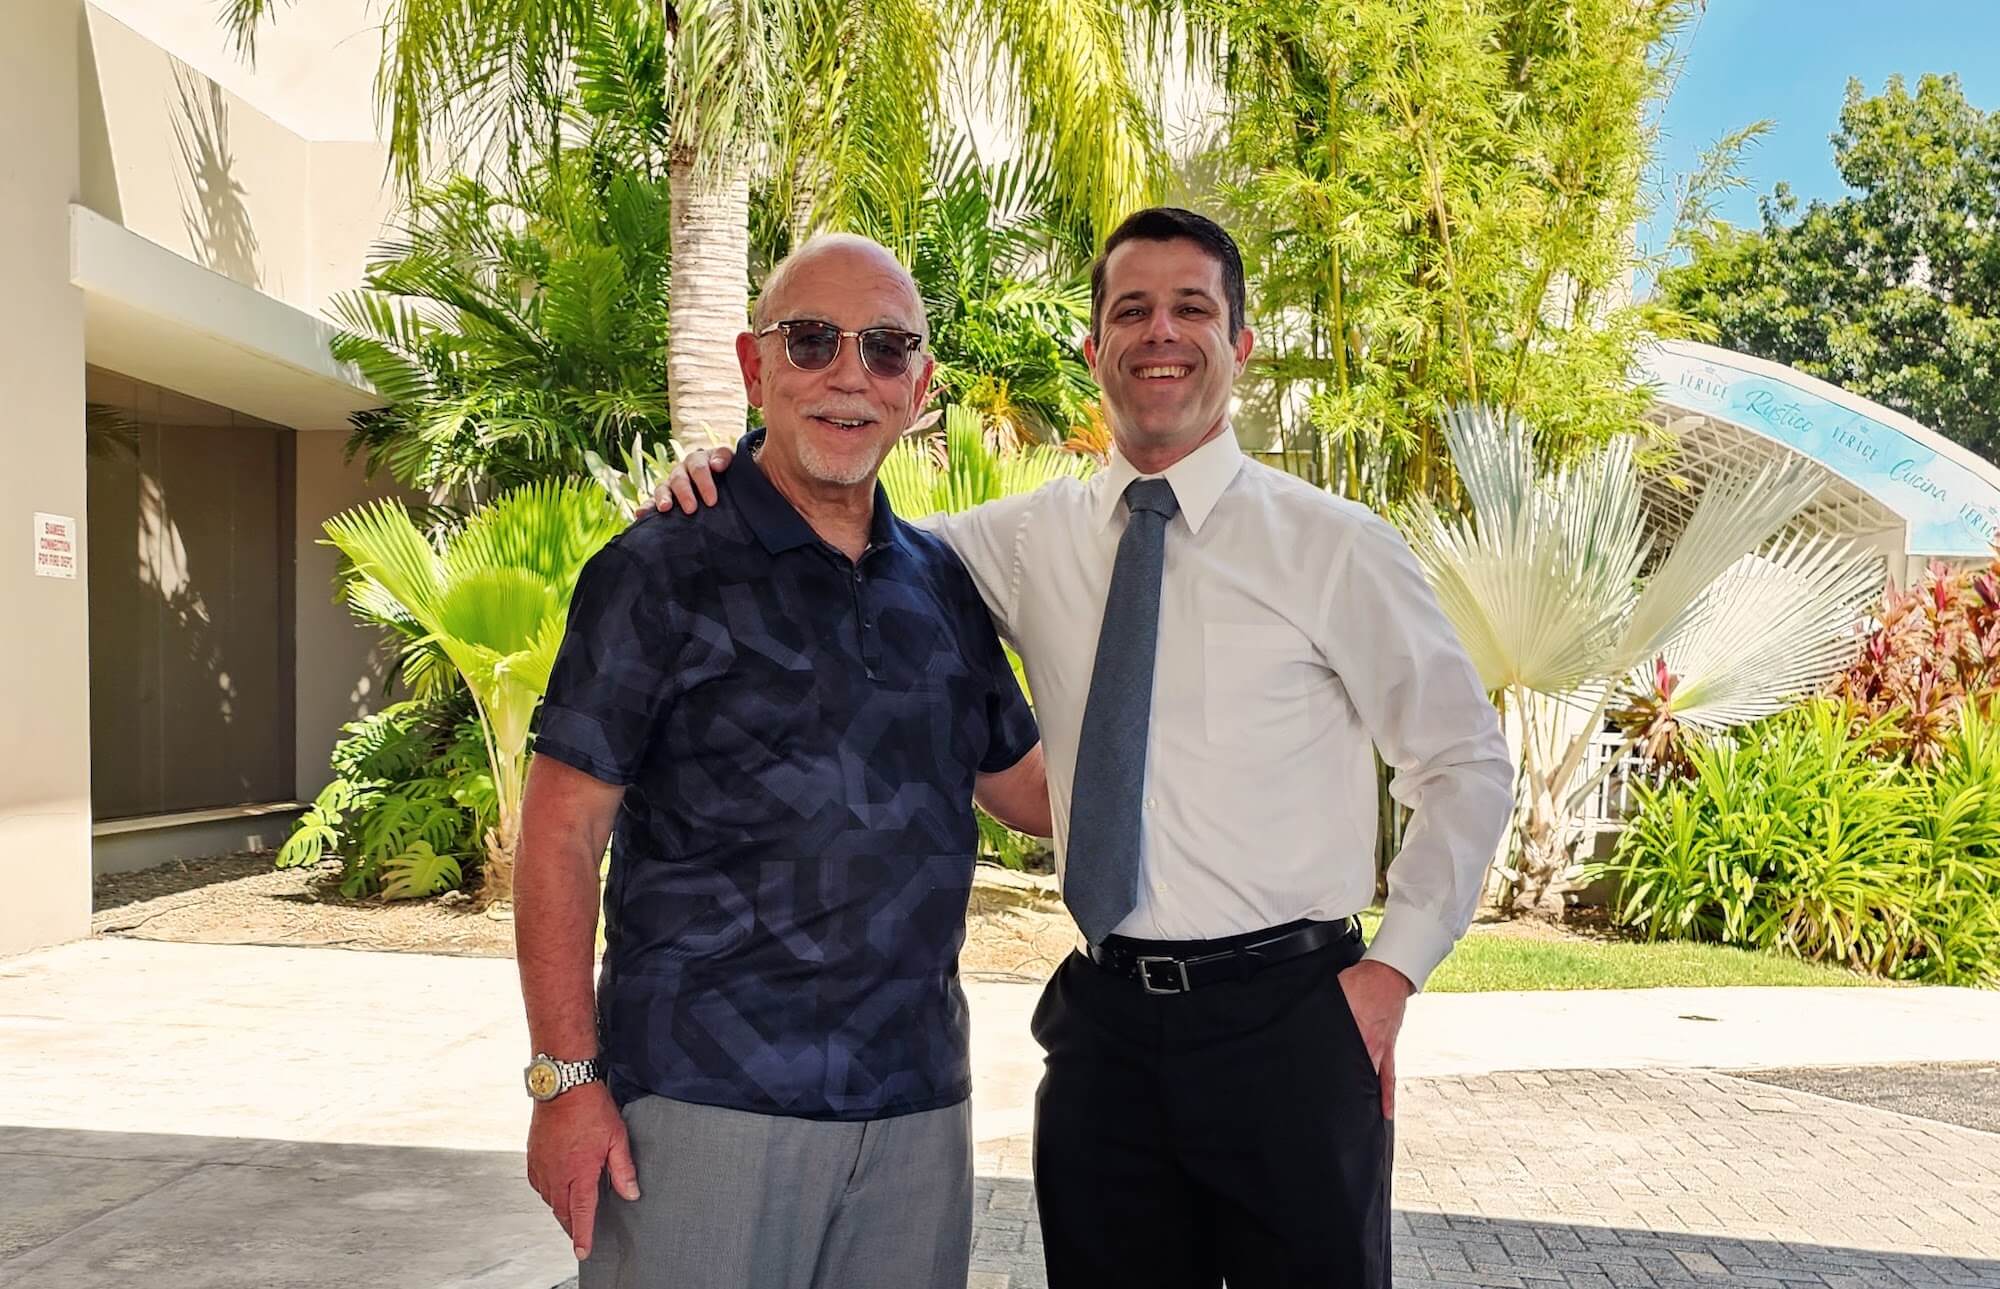 Graduate School of Business Professor faculty members Charles Priolo and Dr. Gavin Goldstein outside a convention hall in Puerto Rico.